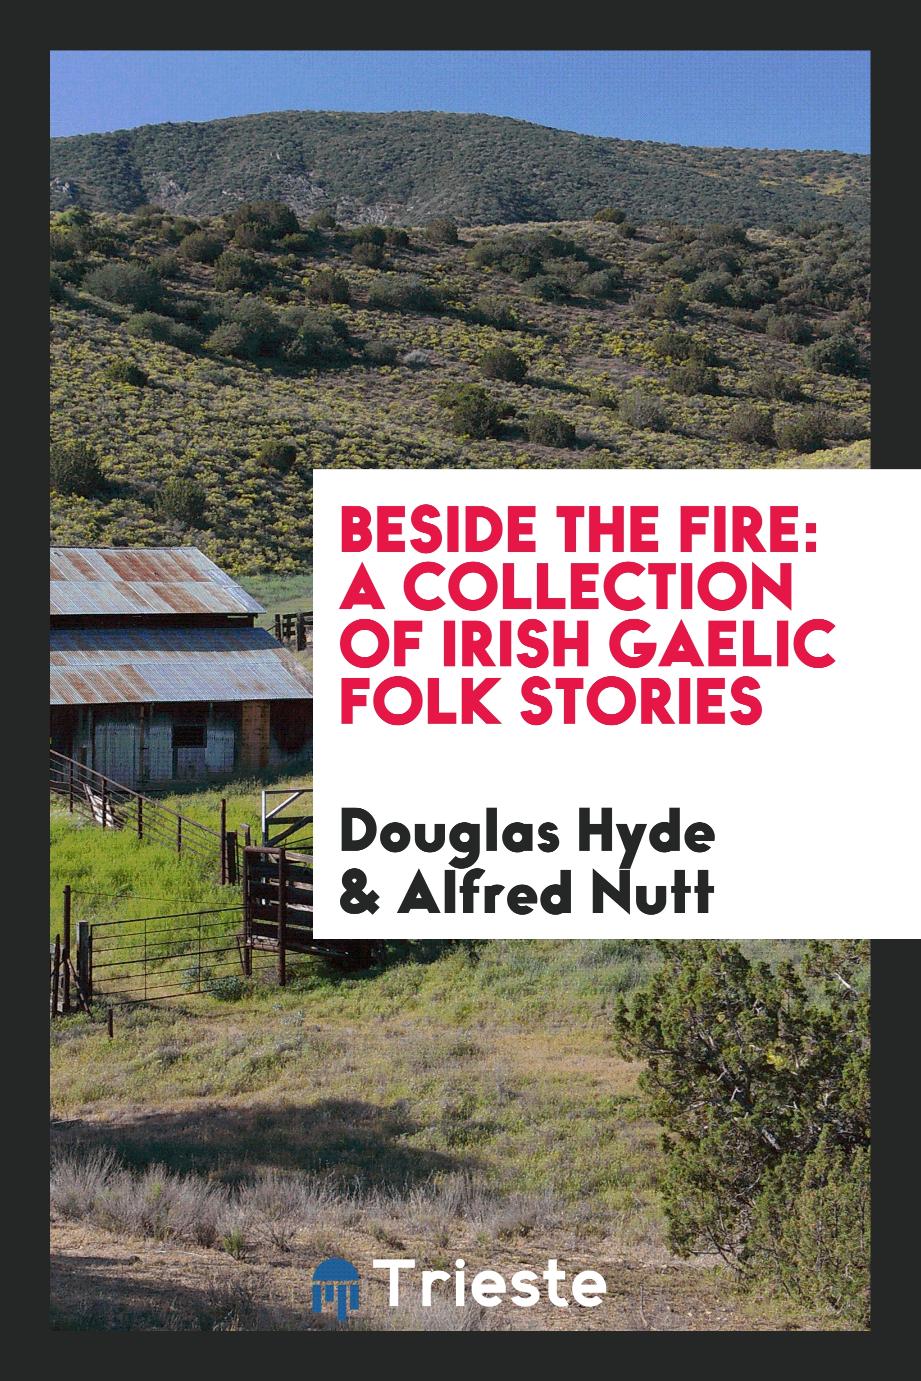 Beside the fire: a collection of Irish Gaelic folk stories